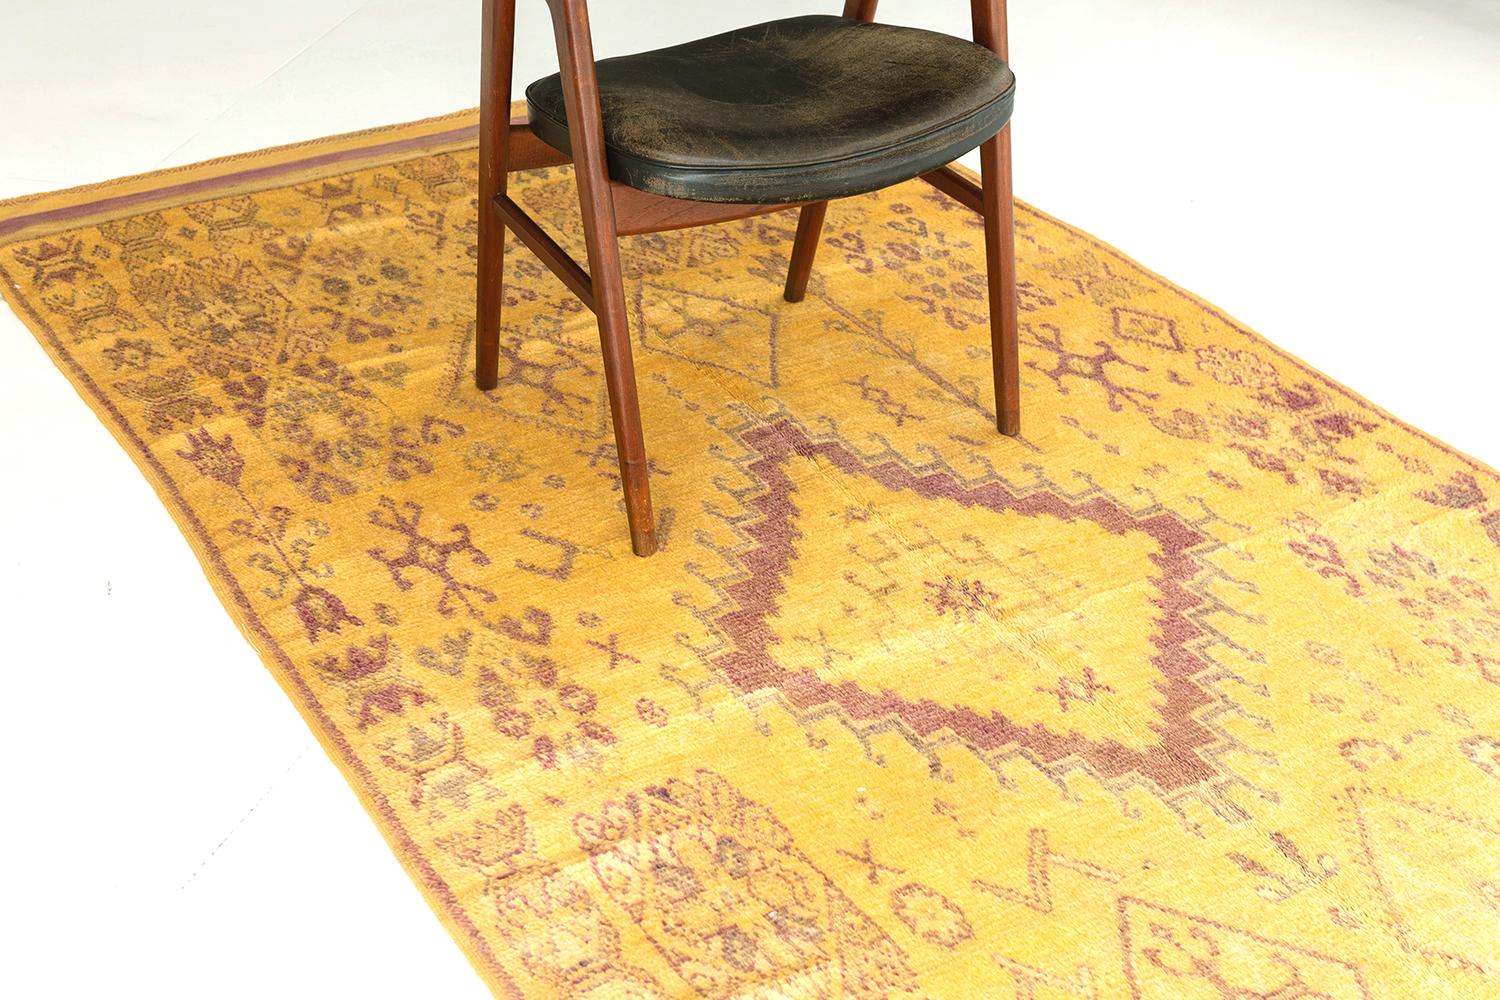 A vintage Moroccan rug in High Atlas Tribe Collection that features a central lozenge medallion surrounded by ambiguous symbolic Berber motifs running along the muted golden field. This remarkable rug is bounded with borders of intricate patterns of